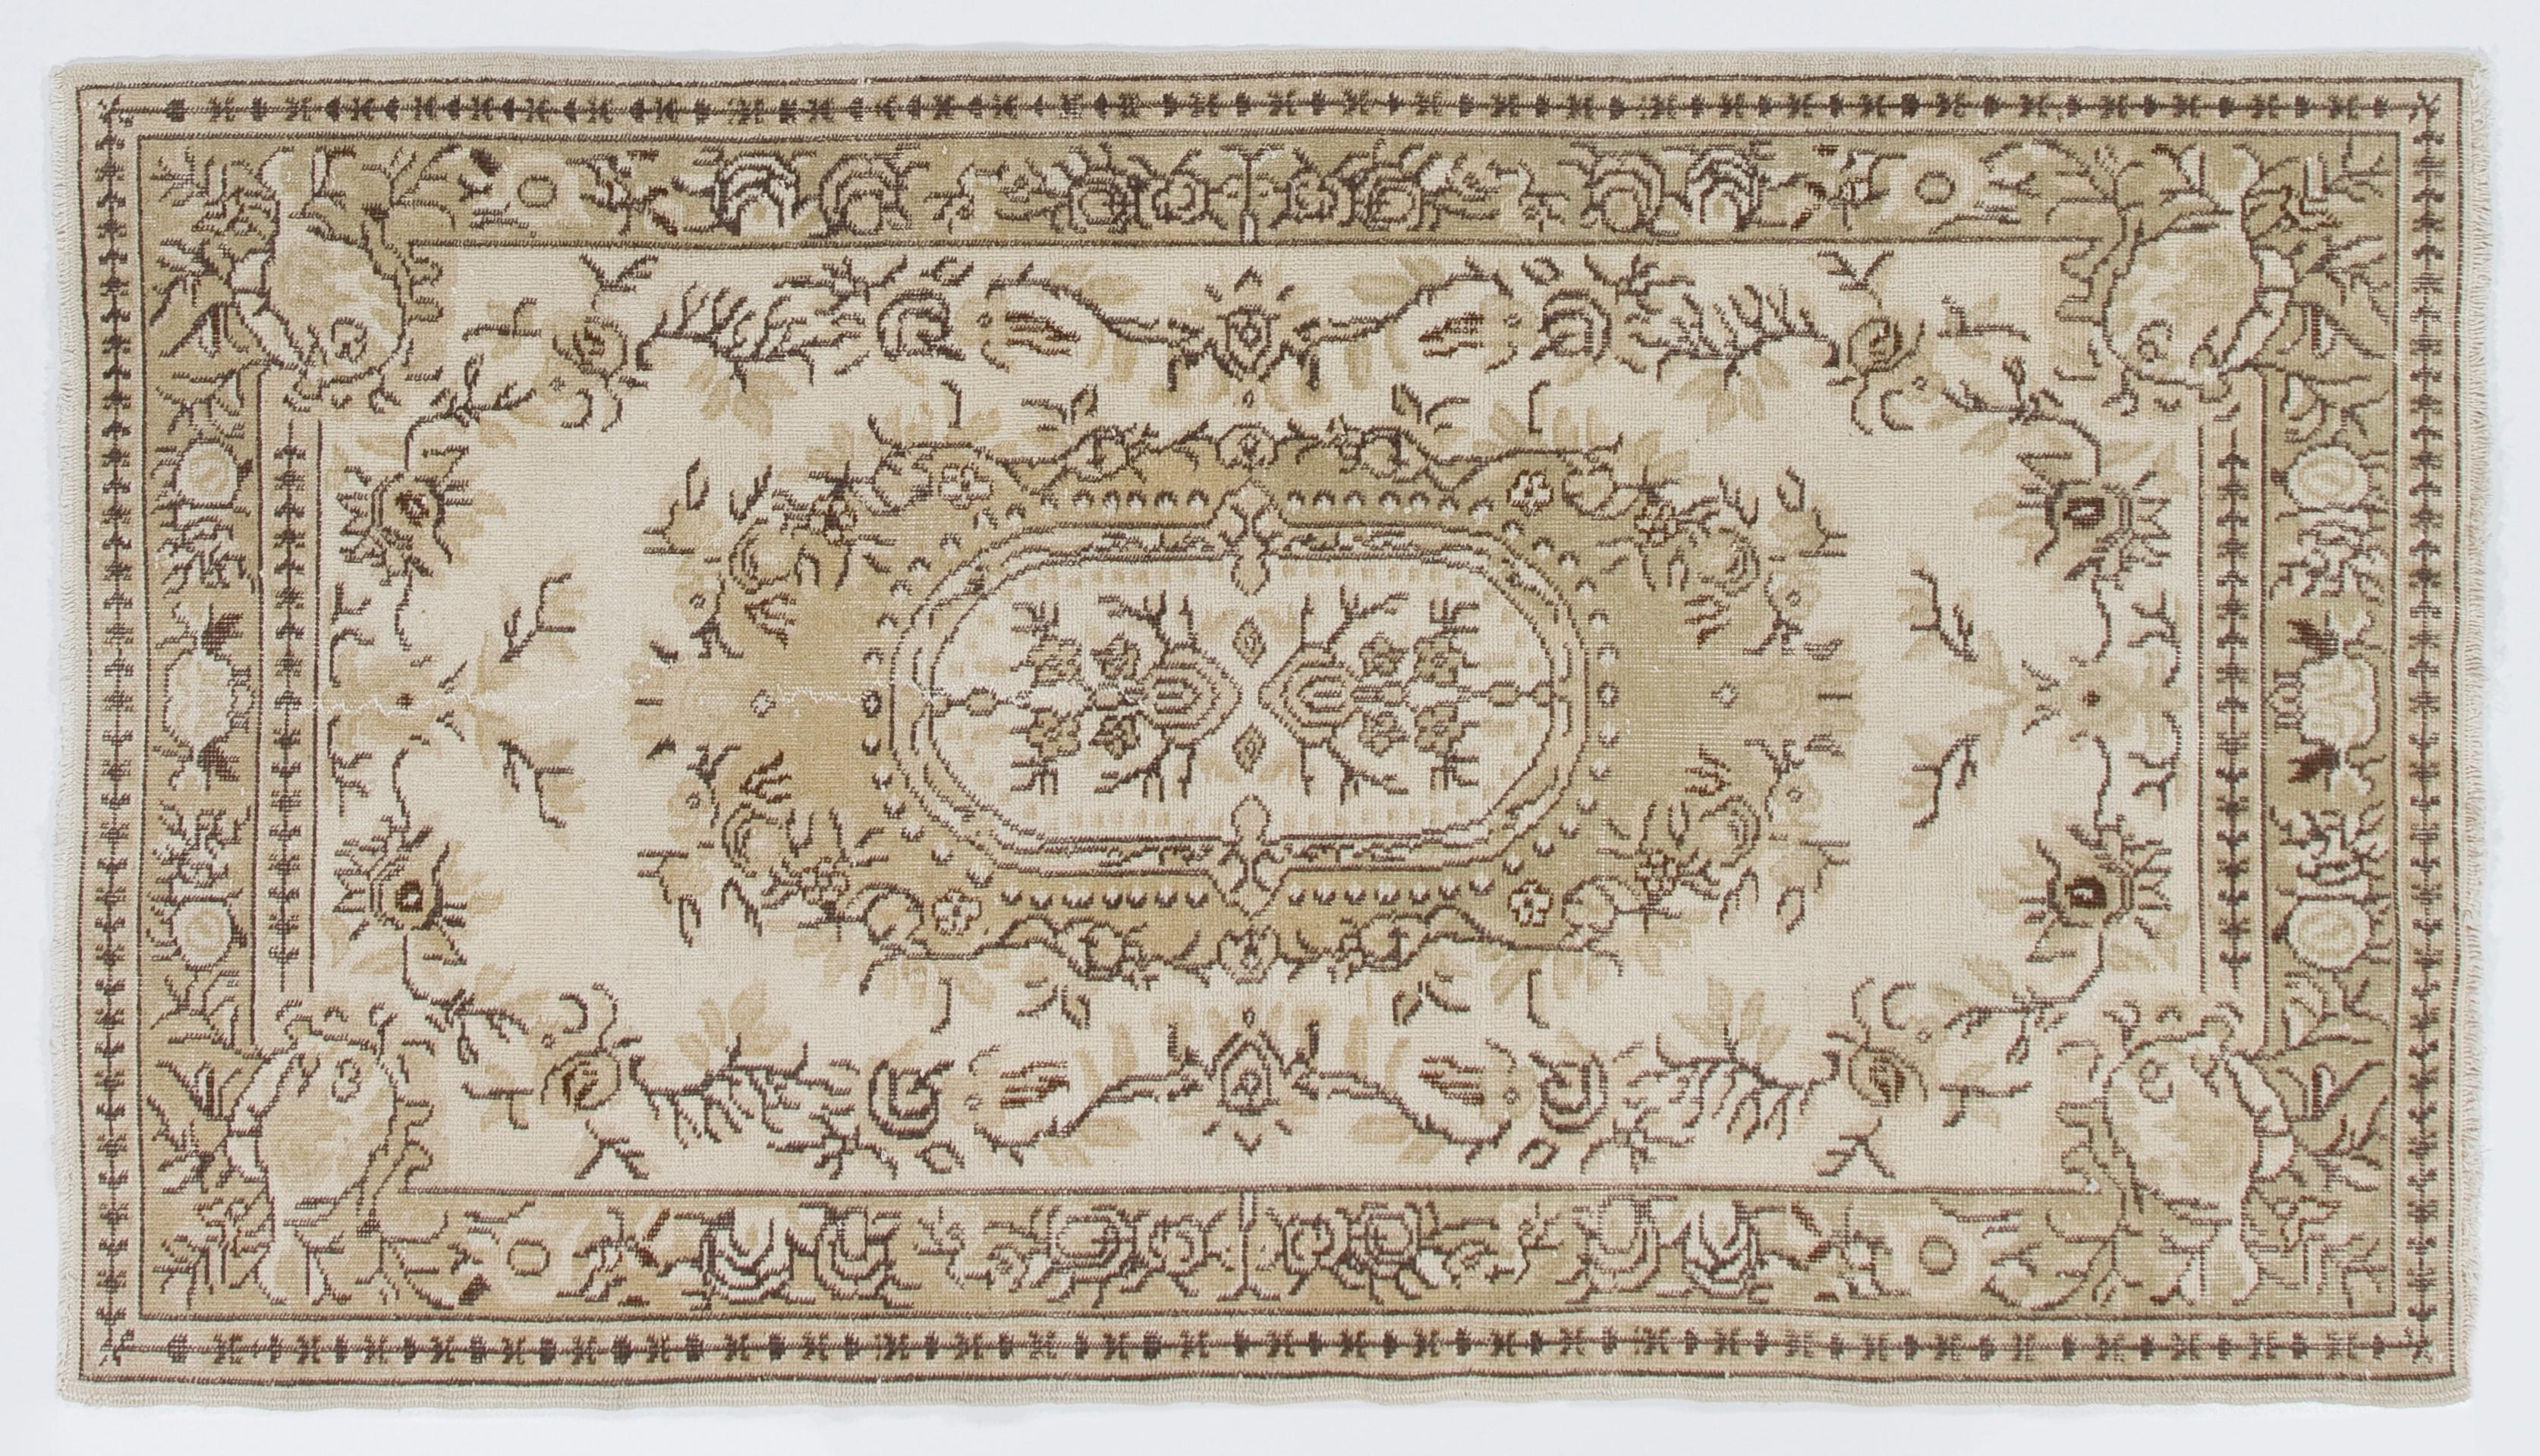 A hand-knotted 1960s Turkish rug with a French Aubusson design with low wool pile on cotton foundation. It features at its center a large floral cartouche in soft, light green that is encircled by a floral wreath against a light beige background.